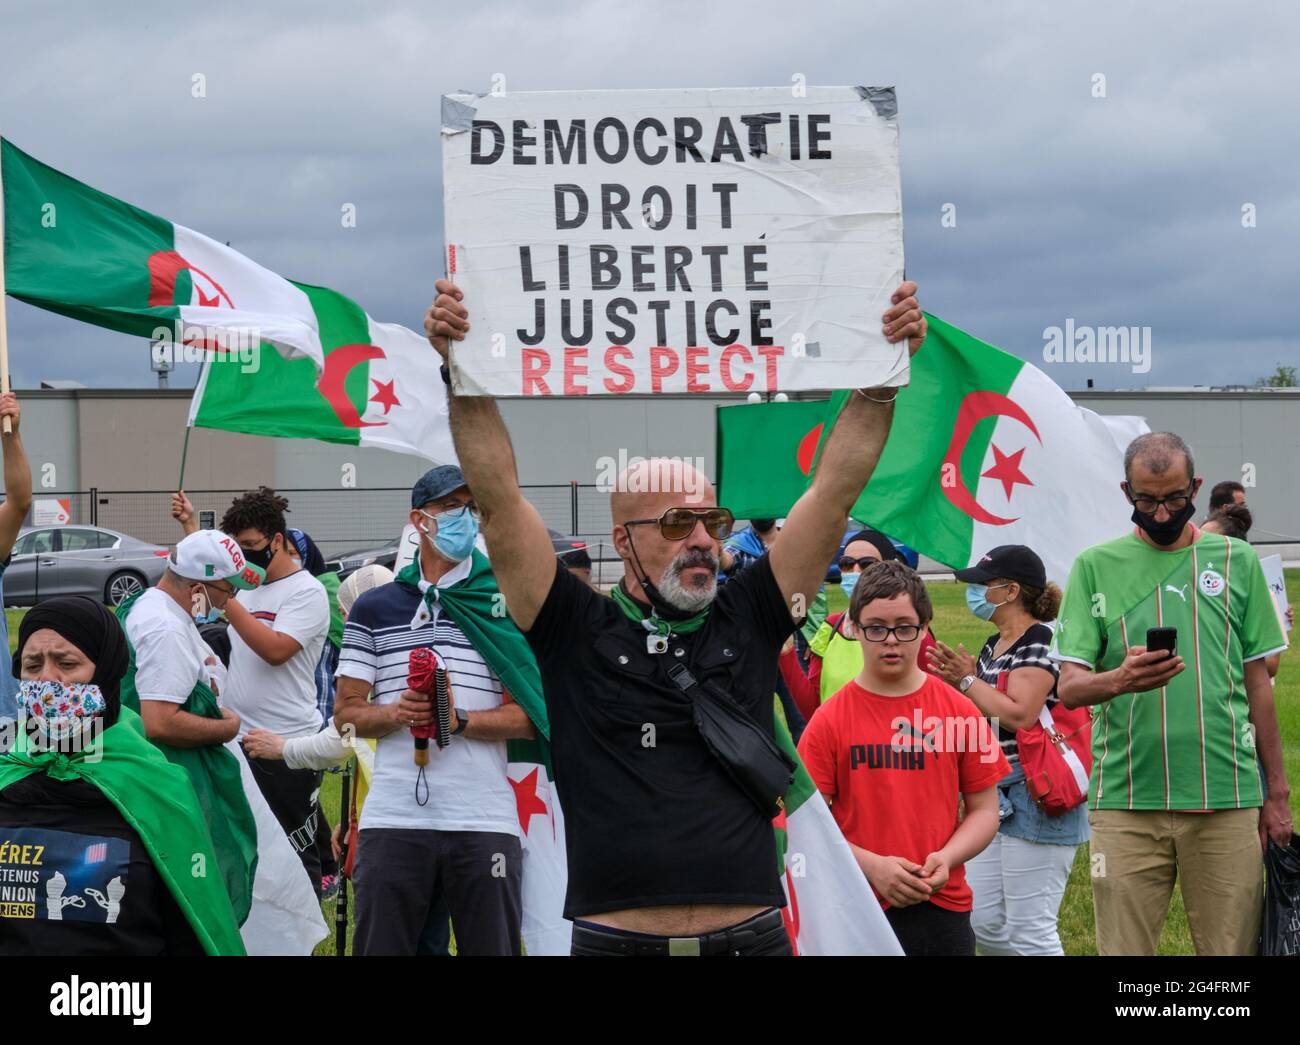 Ottawa, Canada. June 21, 2021. Members of the Algerian community in Canada rally in front of the Parliament to urge the Canadian Government to condemn the escalation of repression in Algeria at the 47th Human Rights Council which begins today. They present that since the resumption of the pro-democracy “Hirak” movement in 2019 the authorities have increased intimidation and arbitrarily arrested at least 6000 including activists, journalists and human rights defenders. They ask the Government to continue leadership in condemning the situation. Credit: meanderingemu/Alamy Live News Stock Photo